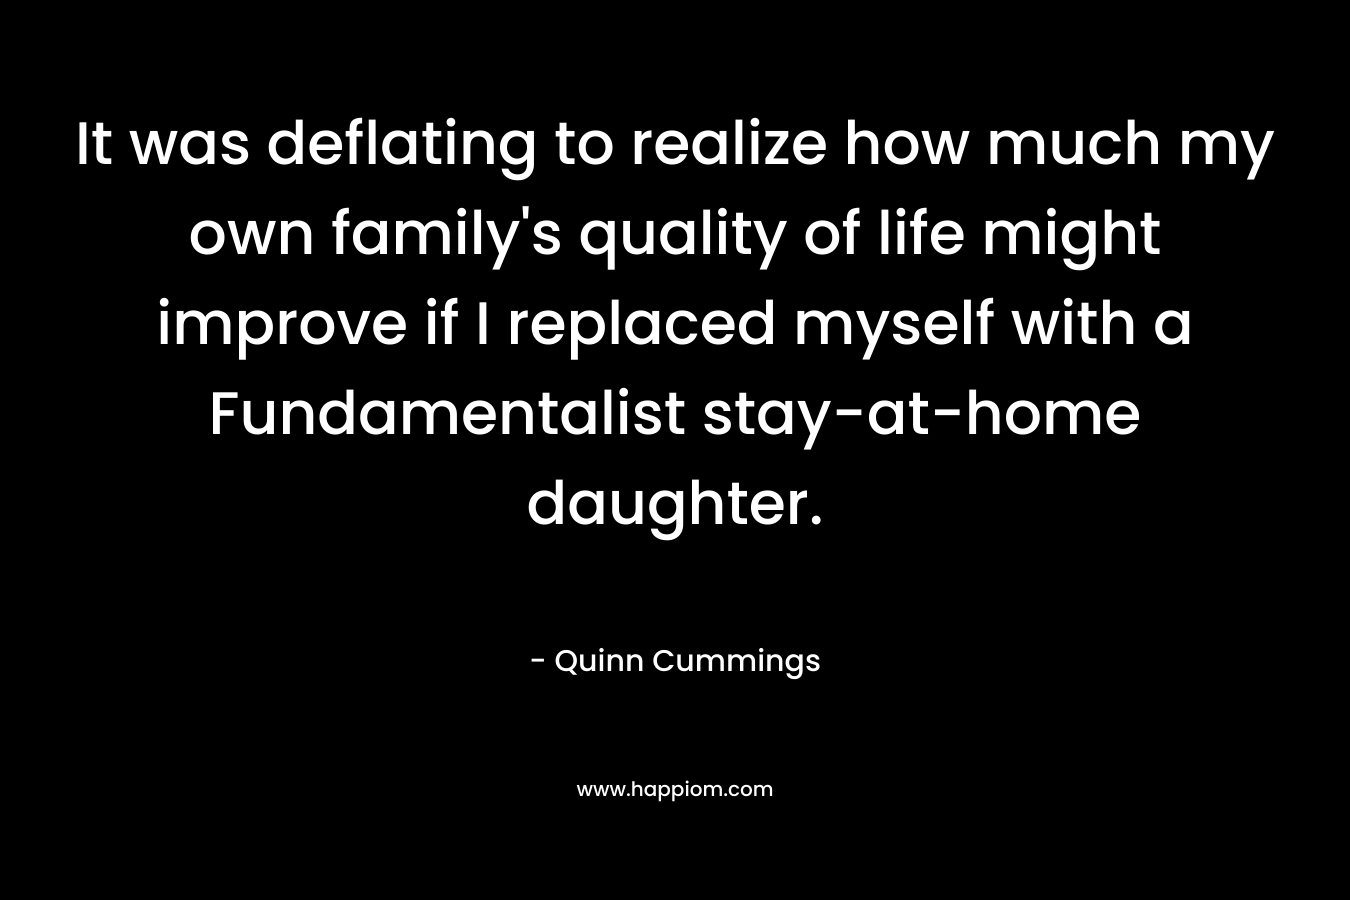 It was deflating to realize how much my own family’s quality of life might improve if I replaced myself with a Fundamentalist stay-at-home daughter. – Quinn Cummings